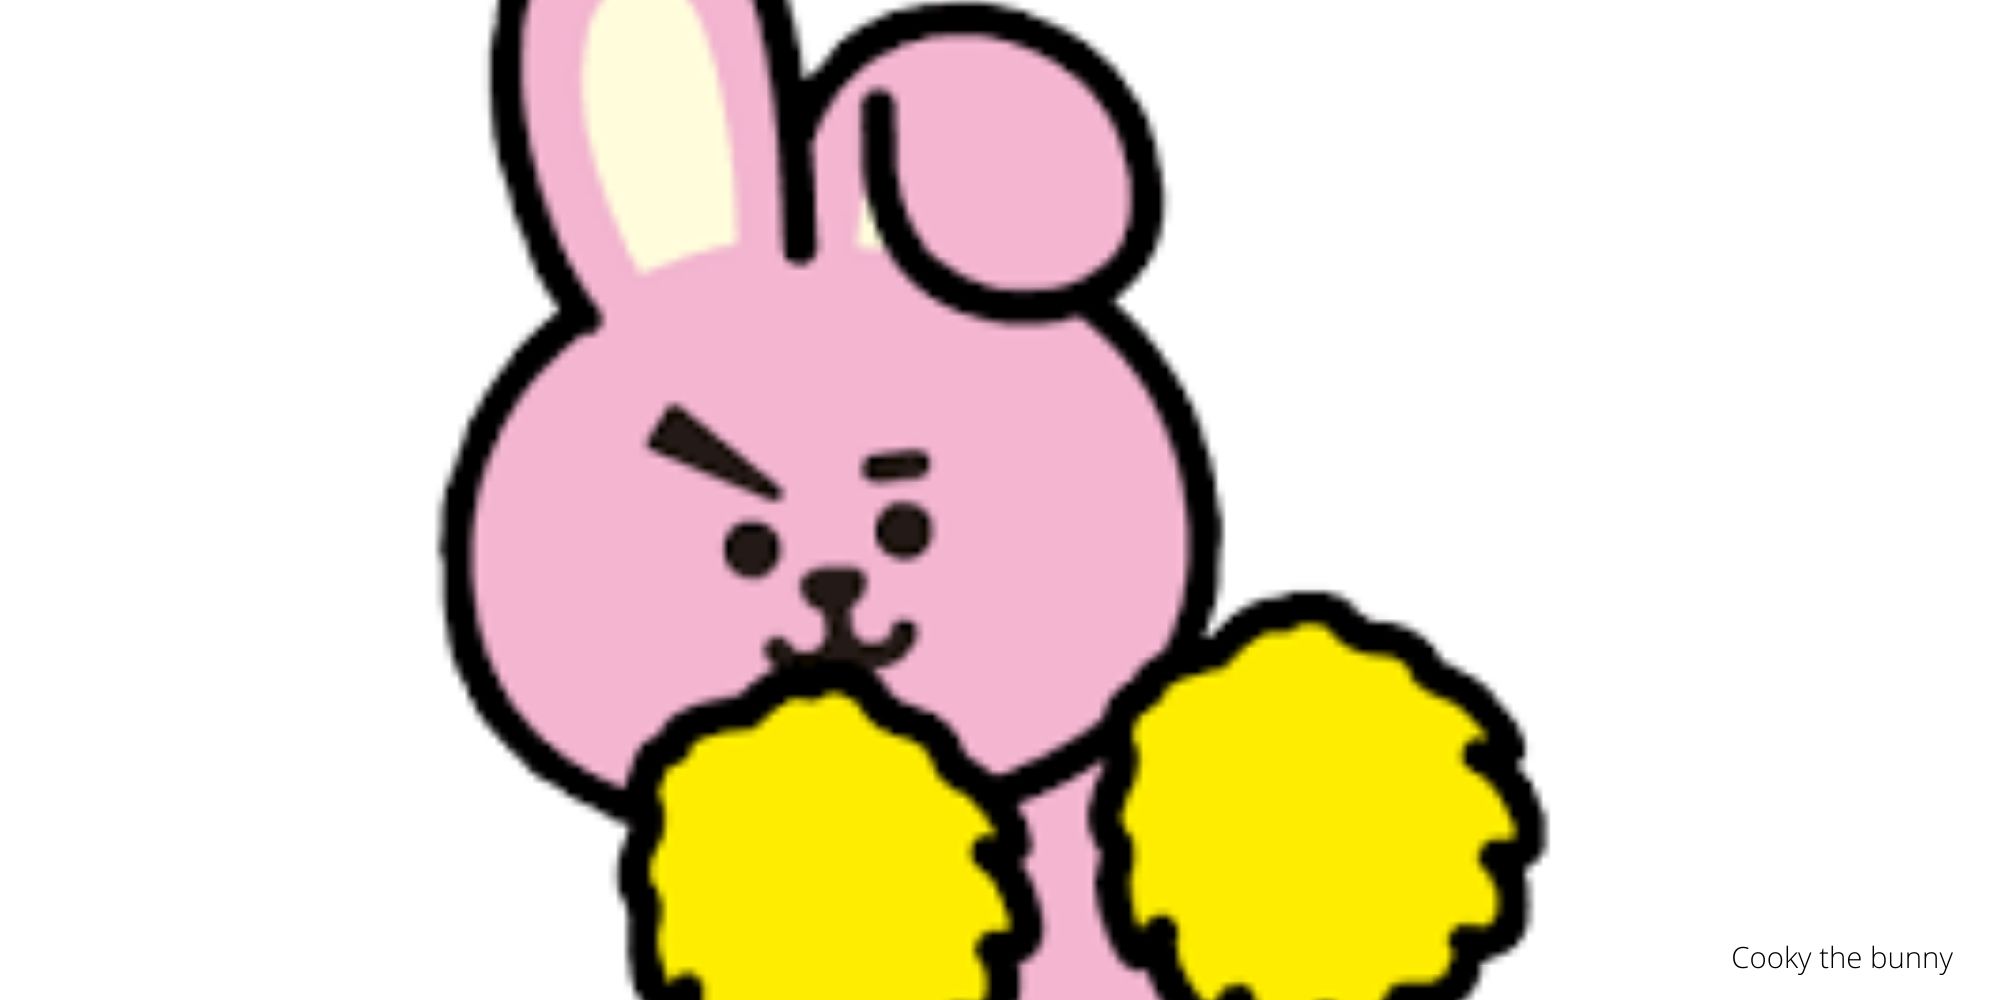 Cooky the bunny